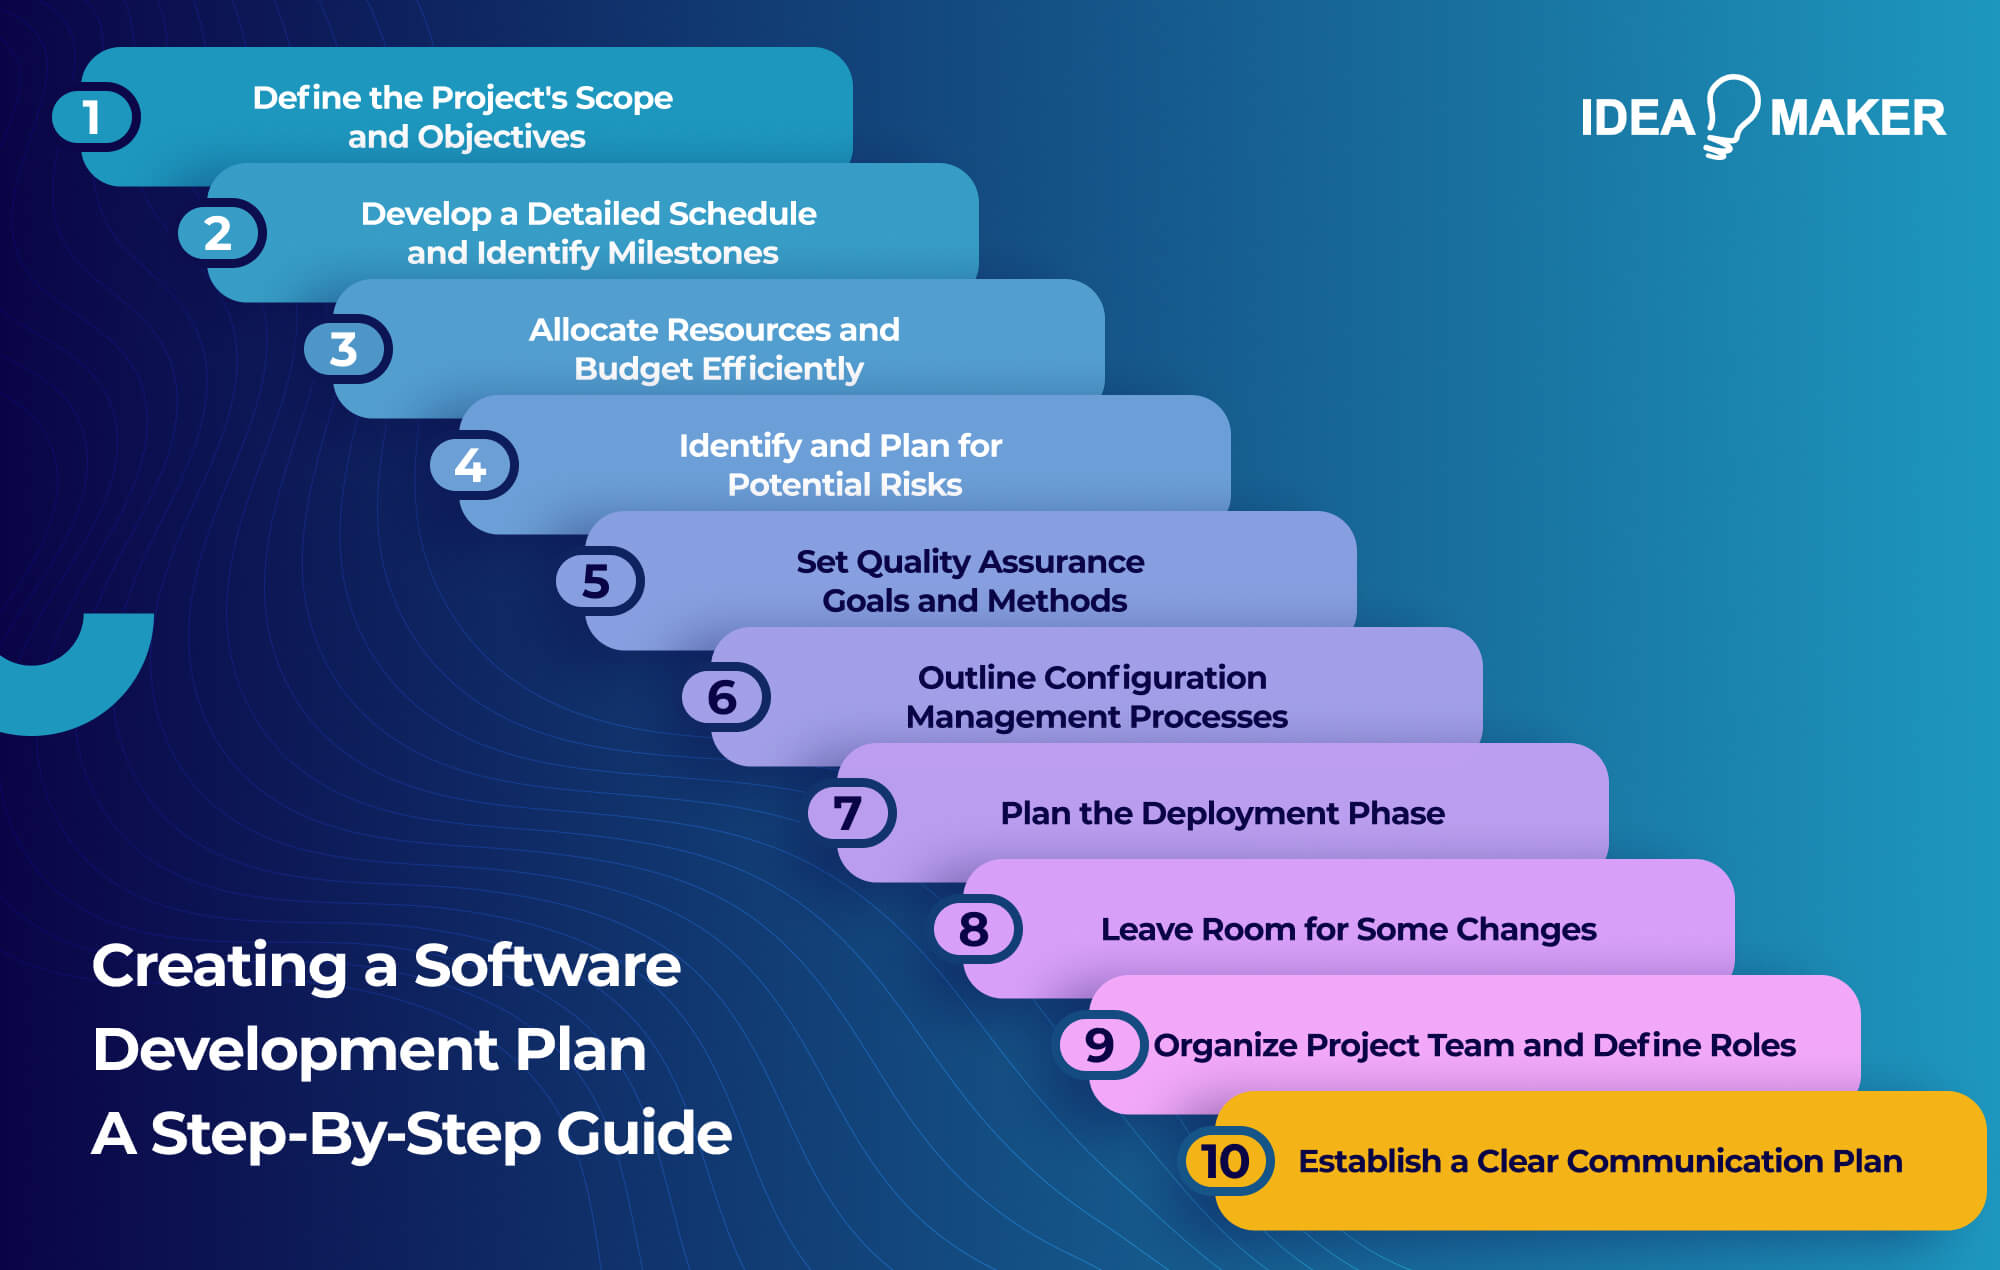 Ideamaker - Creating a Software Development Plan A Step-By-Step Guide